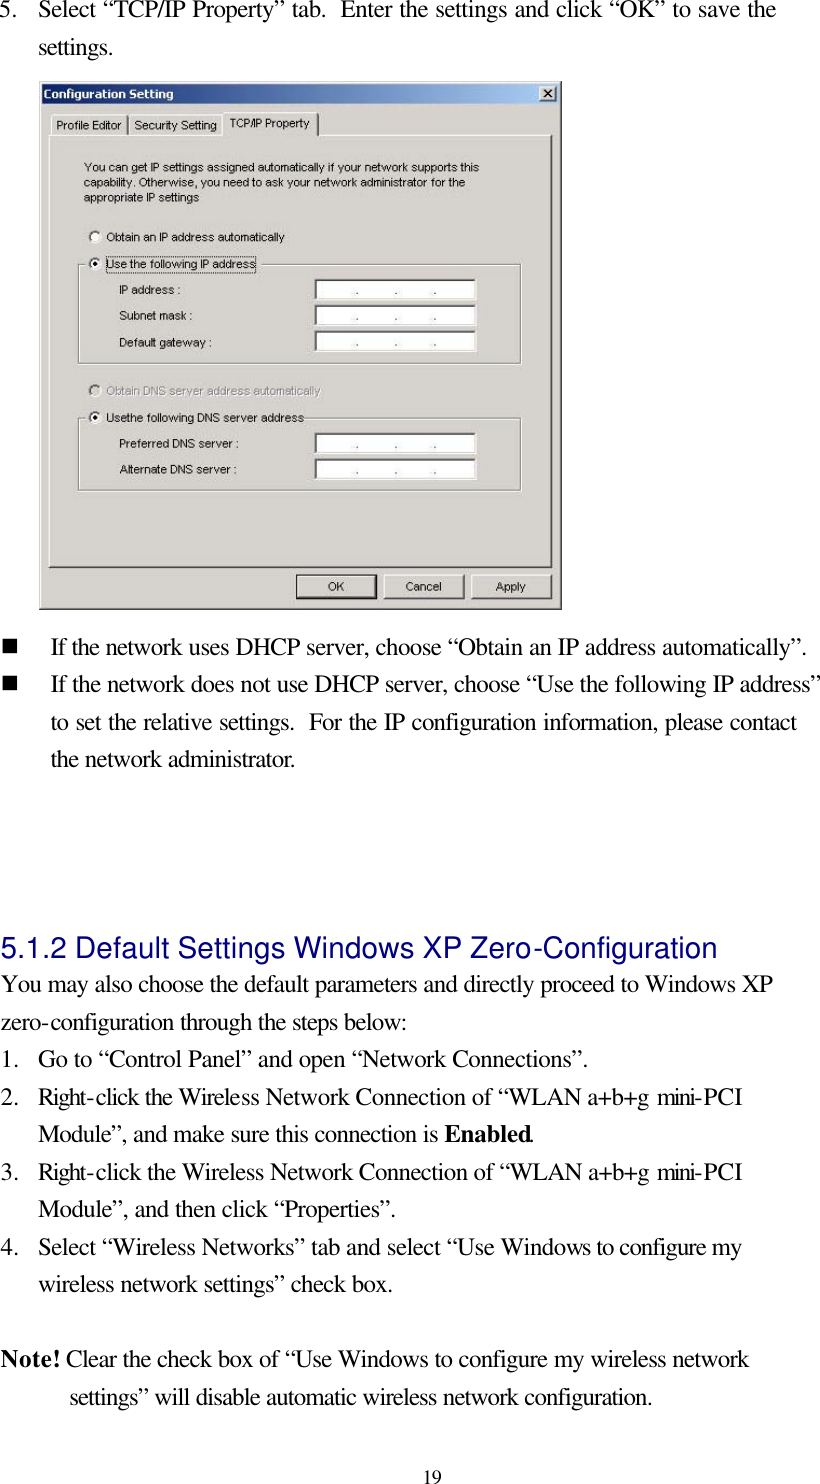  19 5.   Select “TCP/IP Property” tab.  Enter the settings and click “OK” to save the settings.  n If the network uses DHCP server, choose “Obtain an IP address automatically”. n If the network does not use DHCP server, choose “Use the following IP address” to set the relative settings.  For the IP configuration information, please contact the network administrator.   5.1.2 Default Settings Windows XP Zero-Configuration   You may also choose the default parameters and directly proceed to Windows XP zero-configuration through the steps below: 1.  Go to “Control Panel” and open “Network Connections”. 2.  Right-click the Wireless Network Connection of “WLAN a+b+g mini-PCI Module”, and make sure this connection is Enabled. 3.  Right-click the Wireless Network Connection of “WLAN a+b+g mini-PCI Module”, and then click “Properties”. 4.  Select “Wireless Networks” tab and select “Use Windows to configure my wireless network settings” check box.  Note! Clear the check box of “Use Windows to configure my wireless network settings” will disable automatic wireless network configuration. 